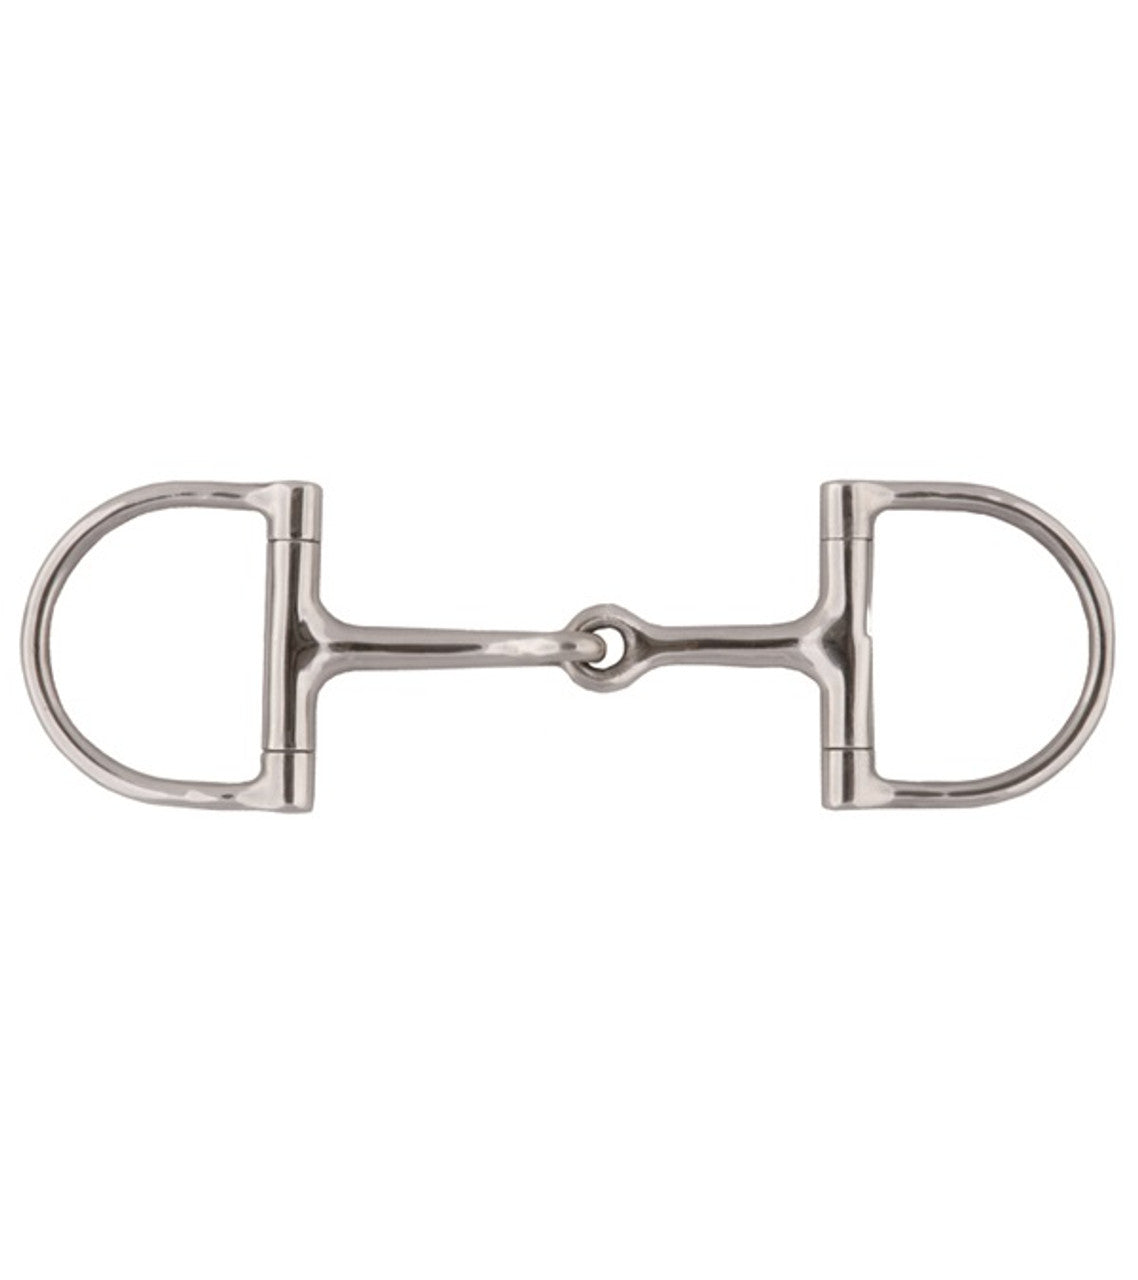 Jointed Mouth Dee Ring Snaffle Bit-TexanSaddles.com